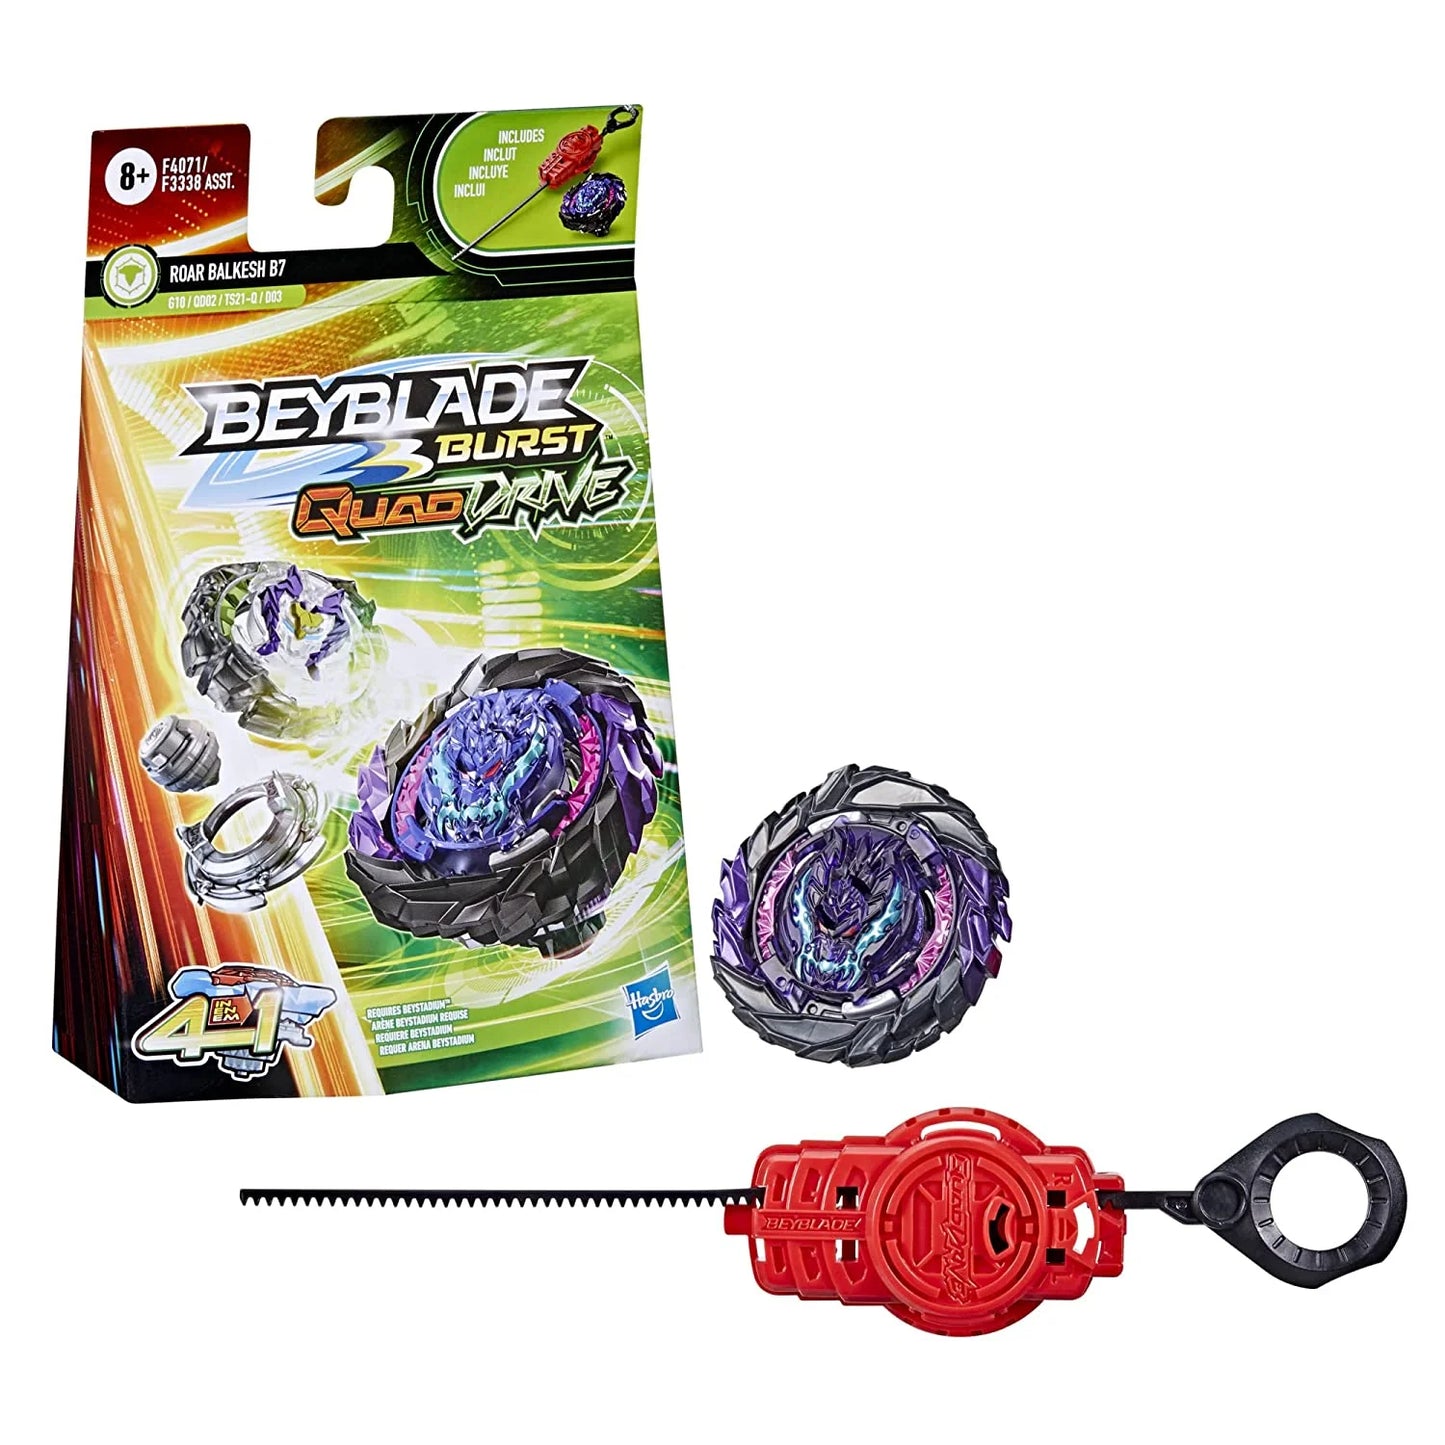 Beyblade Burst QuadDrive Roar Balkesh B7 Spinning Top Starter Pack With Launcher For Kids Ages 8 And Up